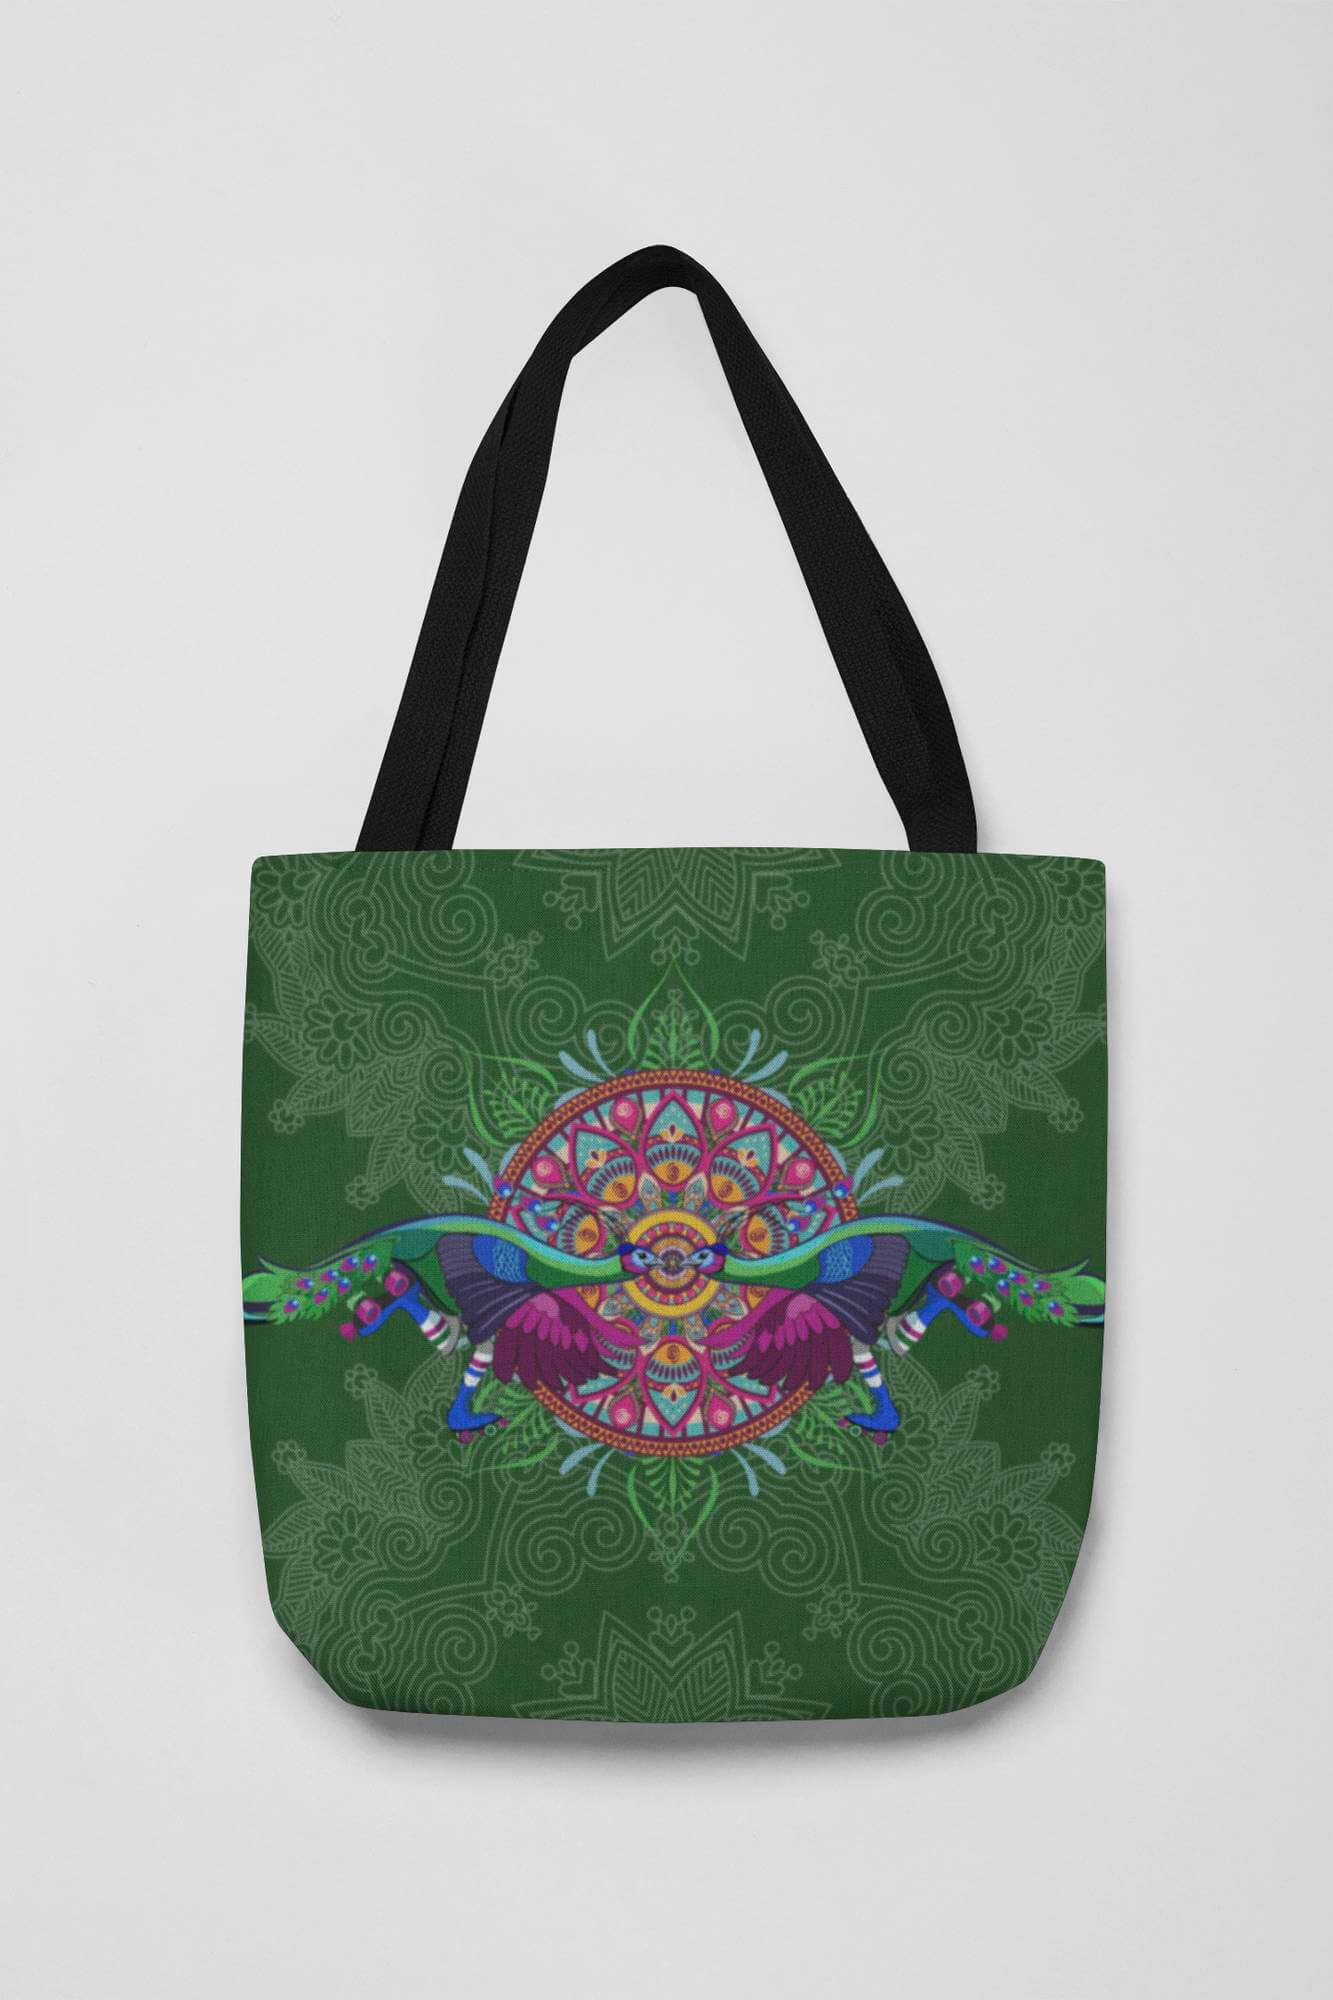 Roller Skating Peacock Canvas Tote